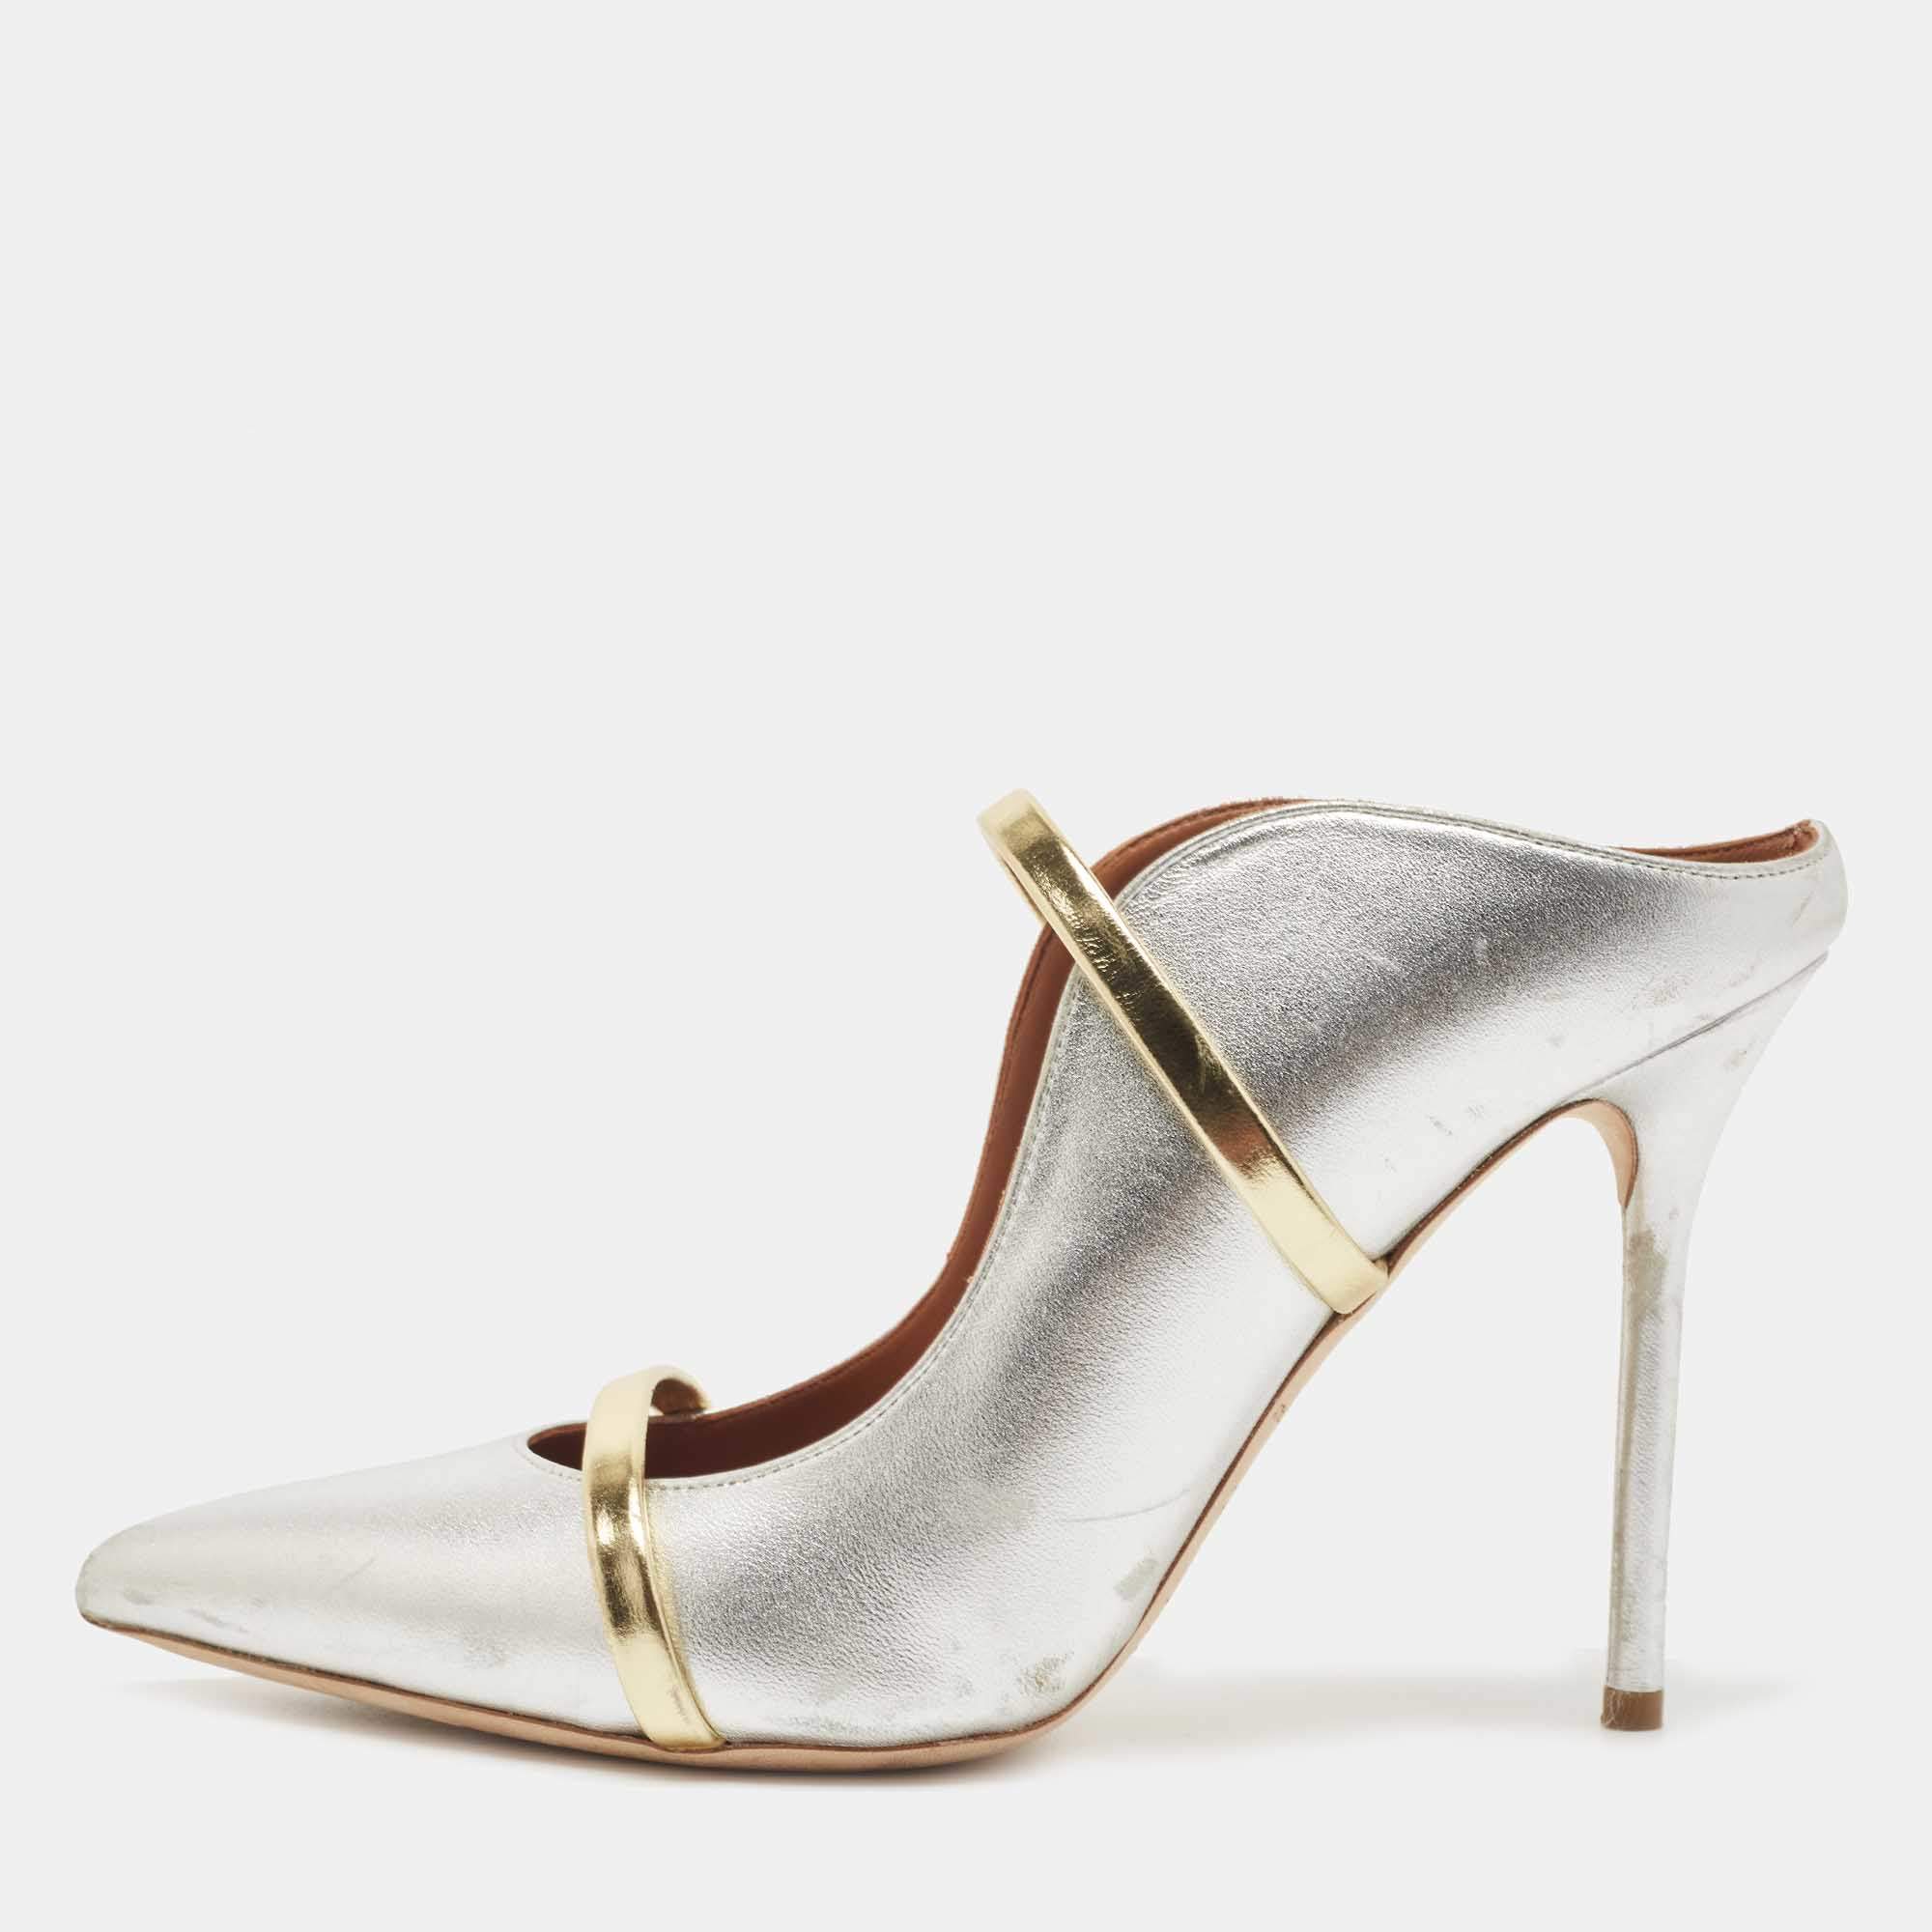 Malone Souliers Silver Leather Maureen Pumps Size 39 Malone Souliers ...